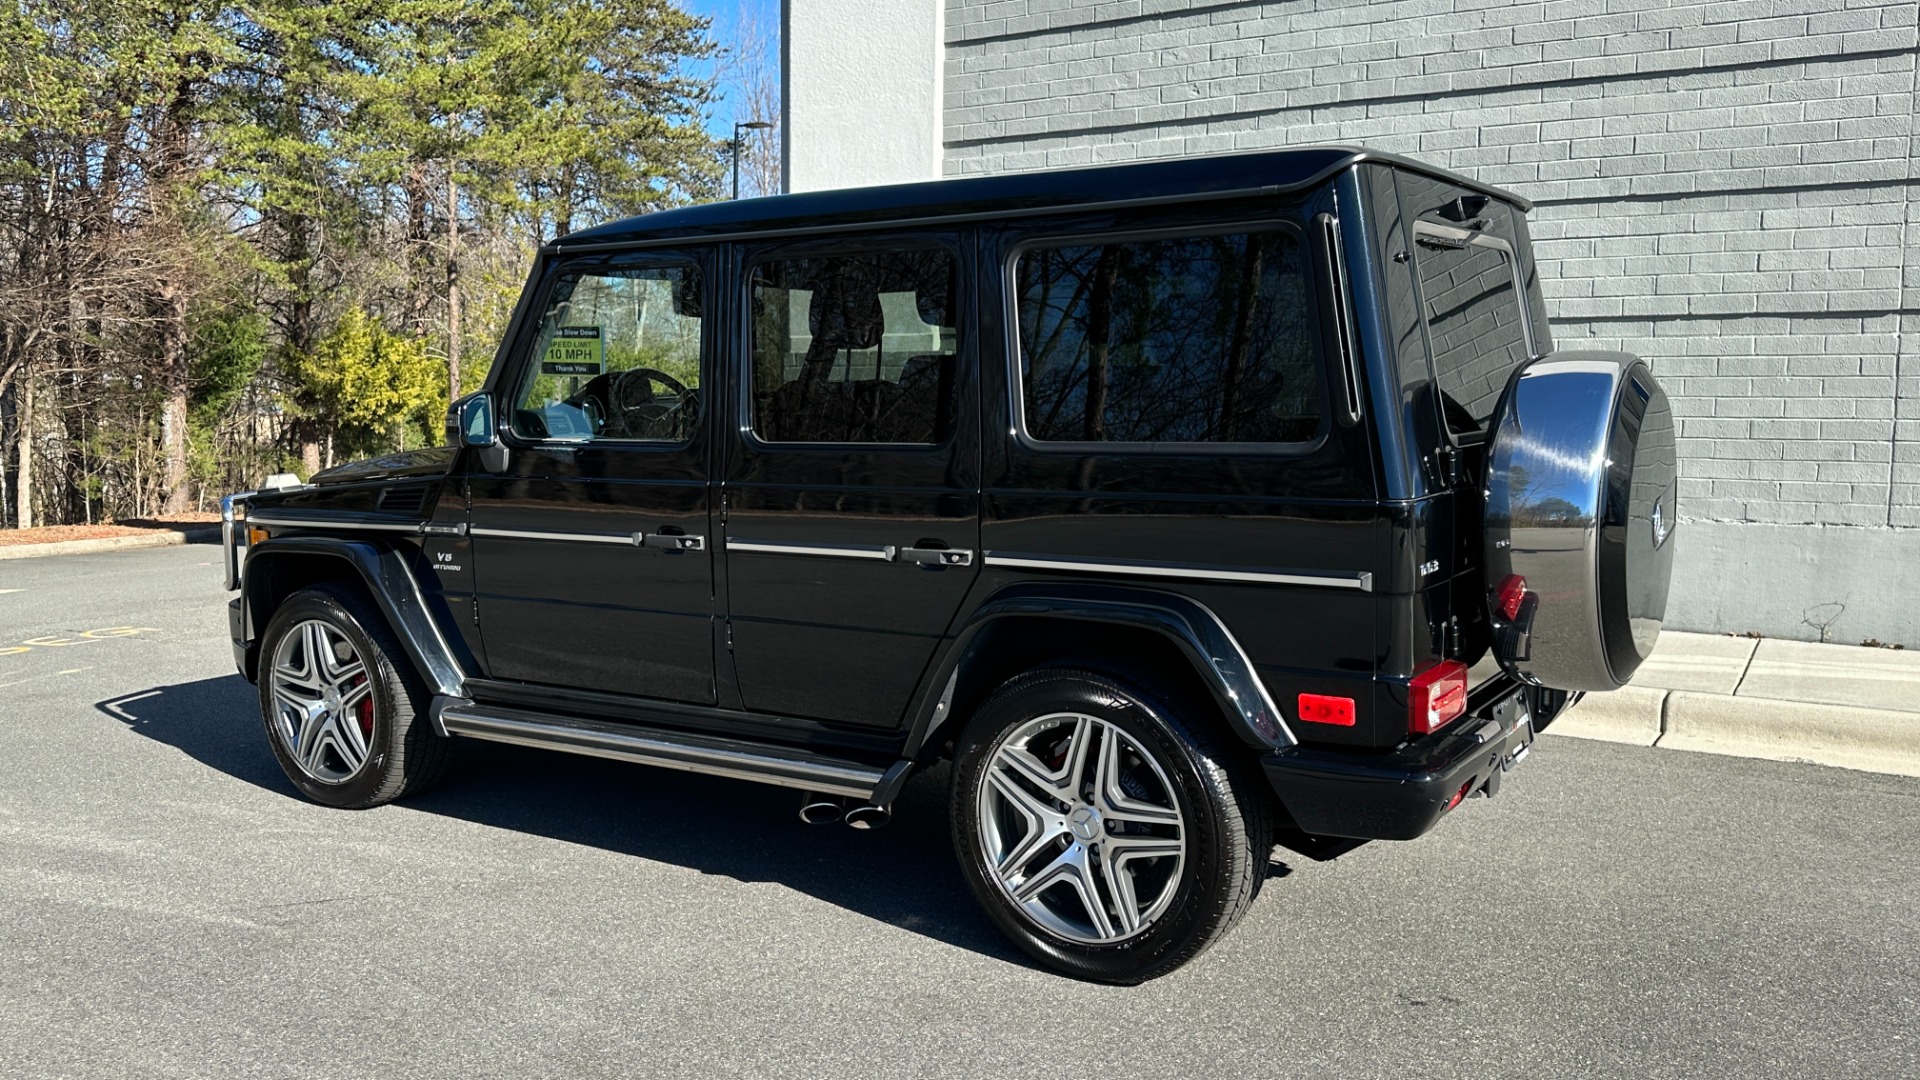 Used 2013 Mercedes-Benz G-Class G63 AMG / DESIGNO INTERIOR / DESIGNO TRIM / 20IN AMG WHEELS for sale $74,995 at Formula Imports in Charlotte NC 28227 3